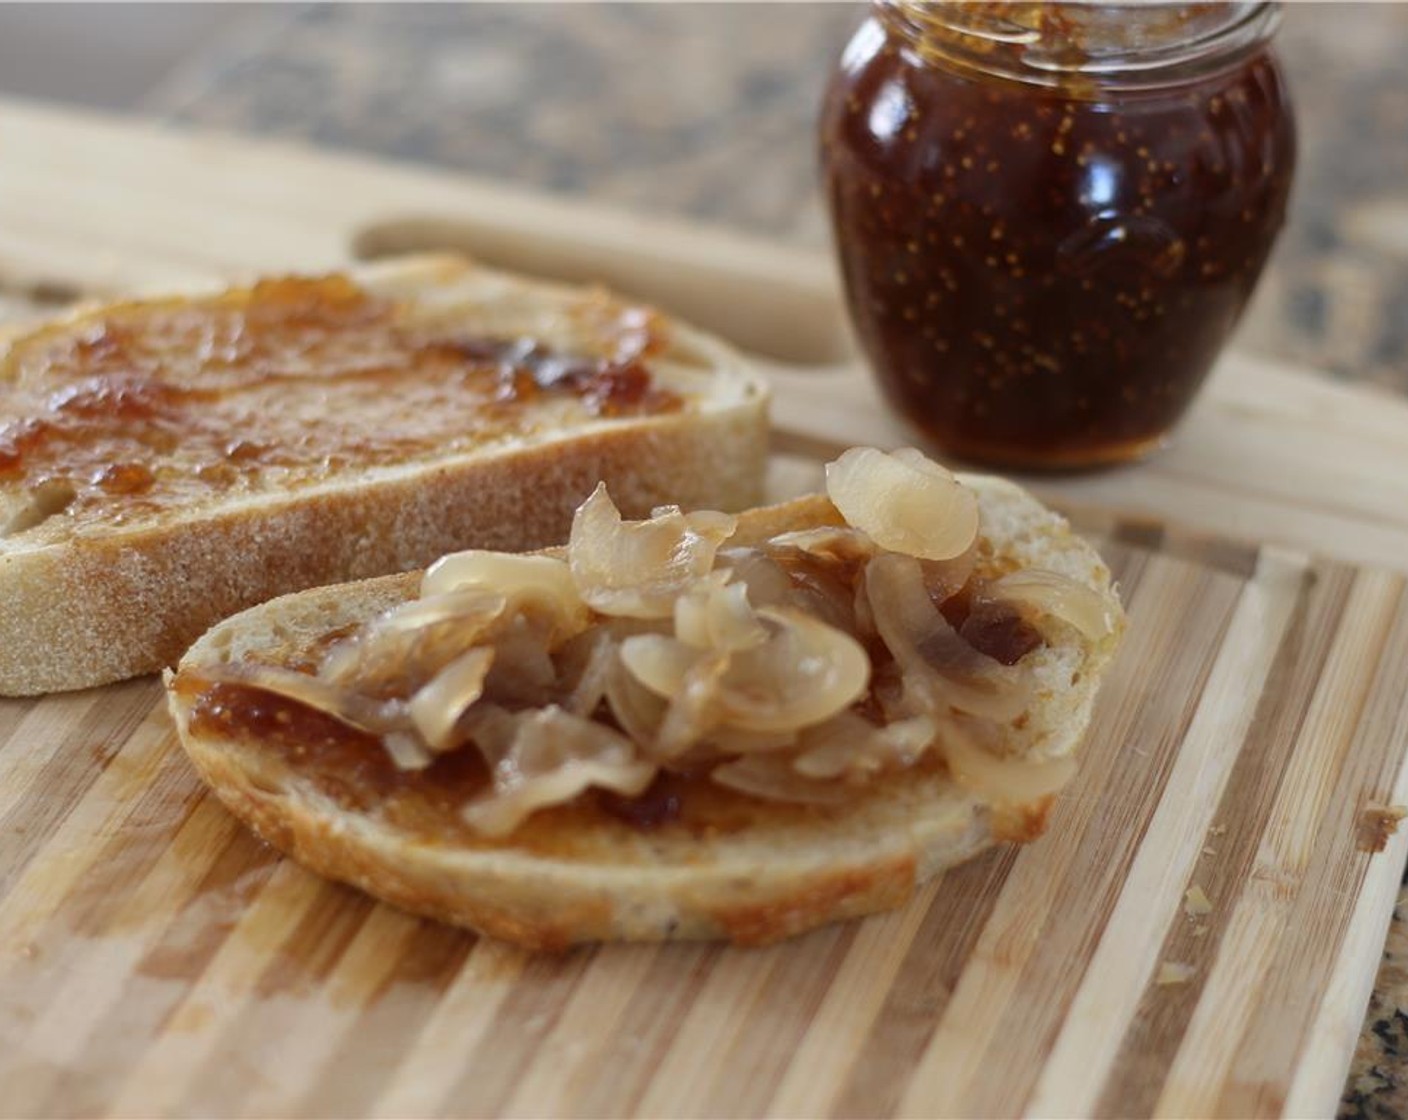 step 3 Flip the bread slices over and spread on a spoonful of Fig Spread (1/4 cup). Top with a layer of onions.